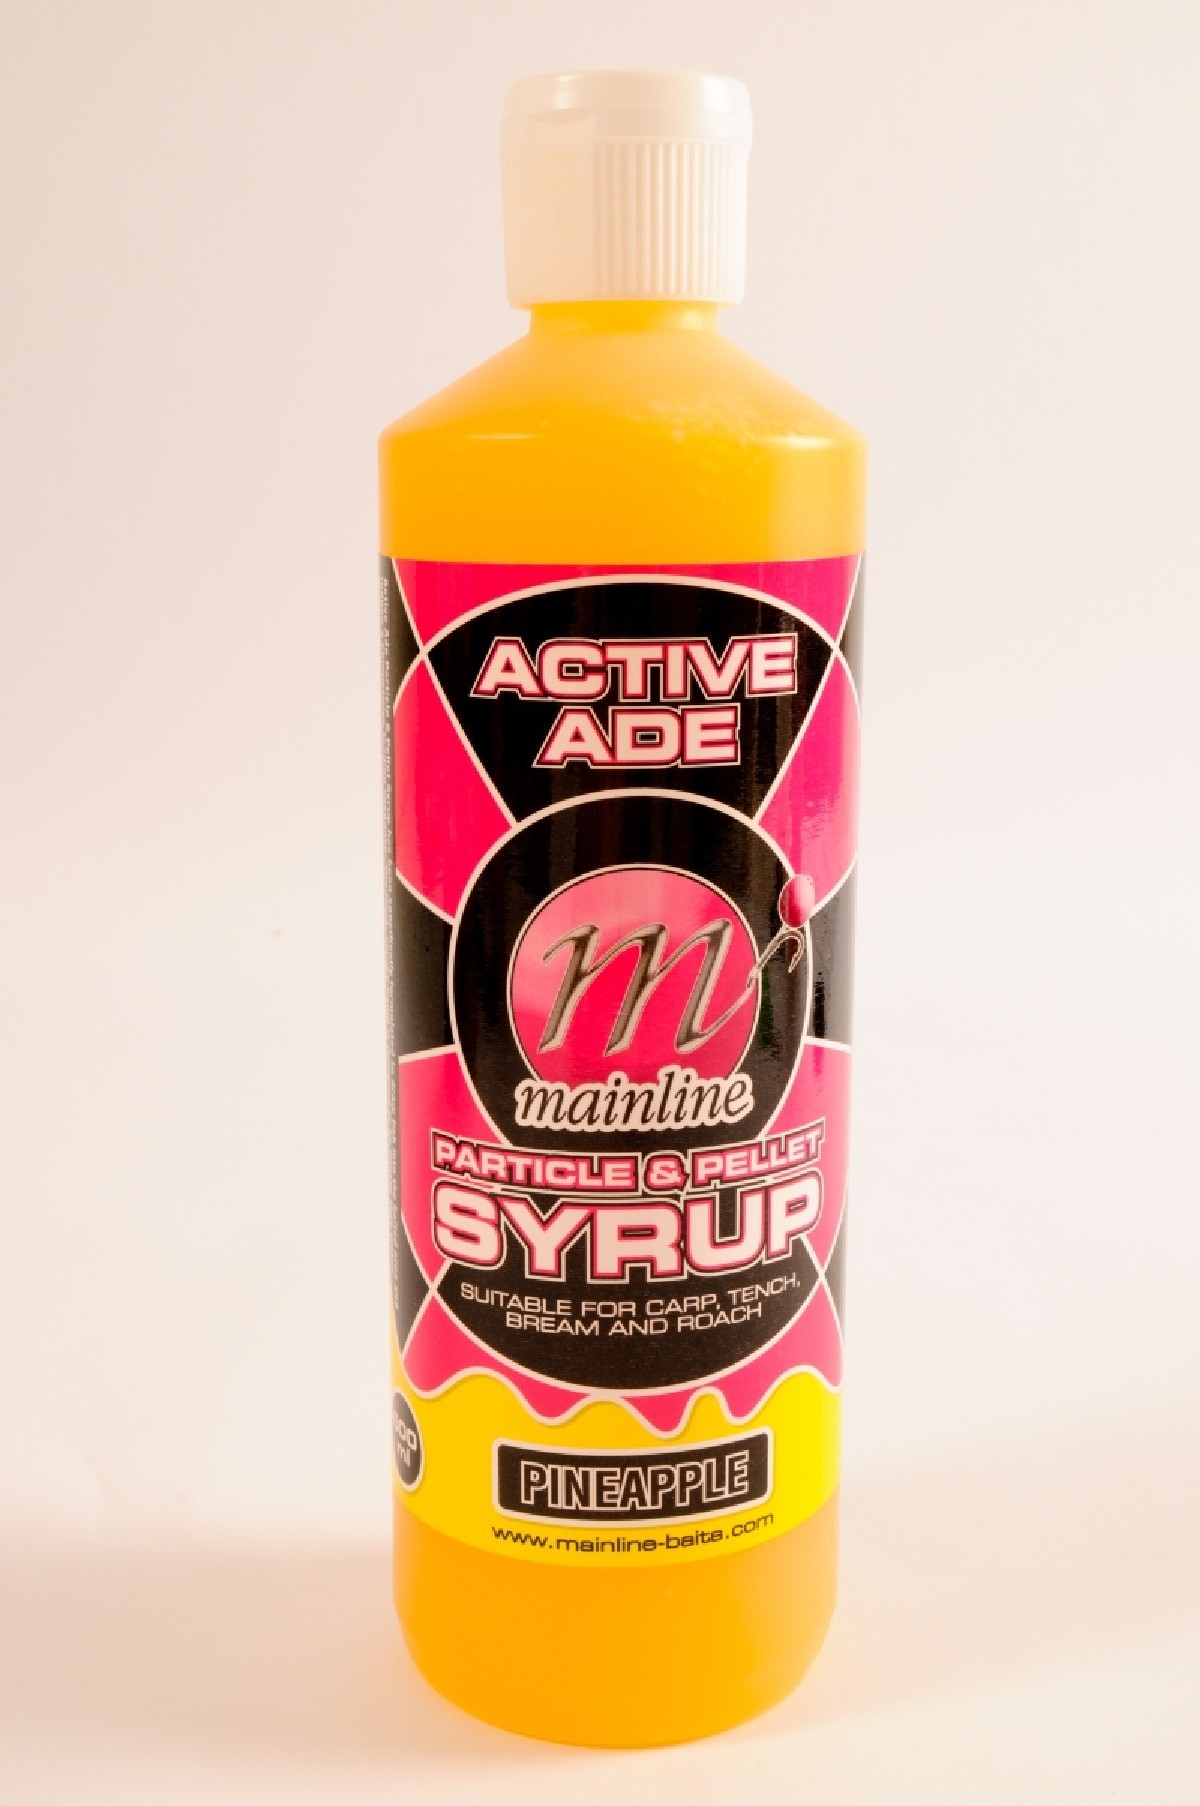 Mainline Active Ade Particle And Pellet Syrup 500ml Pineapple Juice